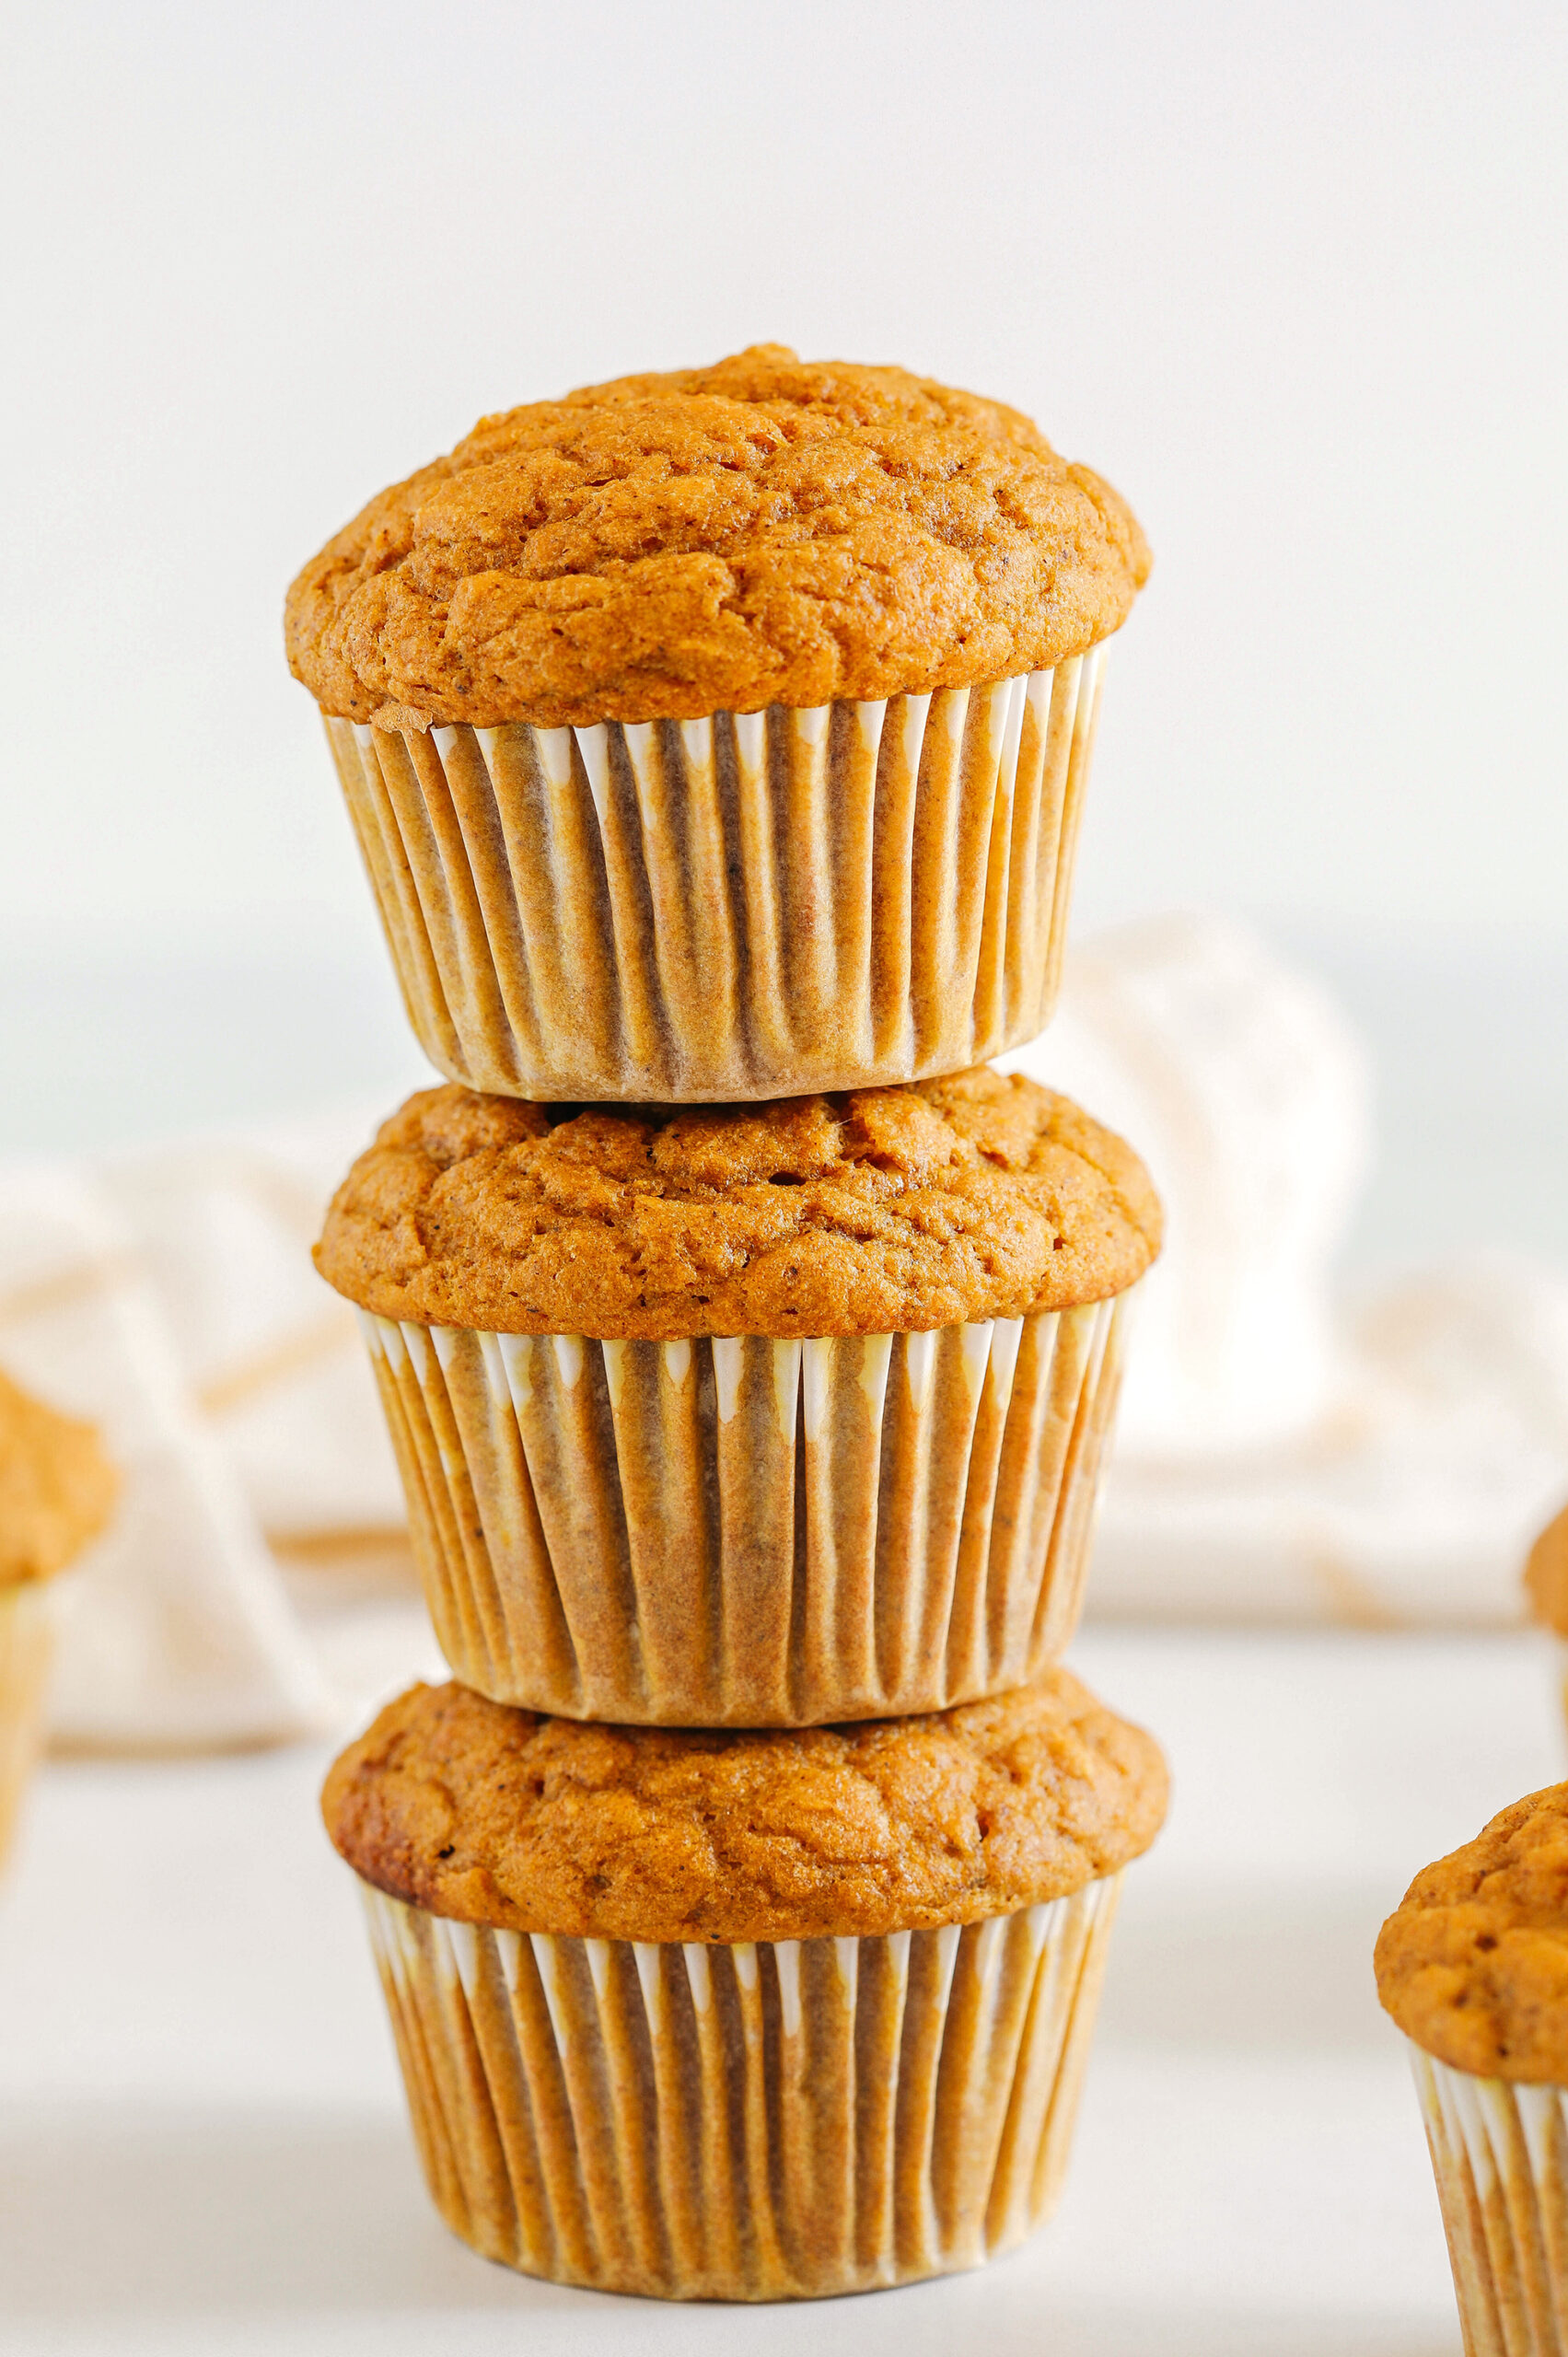 These Whole Wheat Pumpkin Muffins are moist, fluffy, and made healthier with whole wheat flour, applesauce, and zero butter or refined sugar.  Loaded with delicious pumpkin flavor and warm spices for the perfect fall muffin!